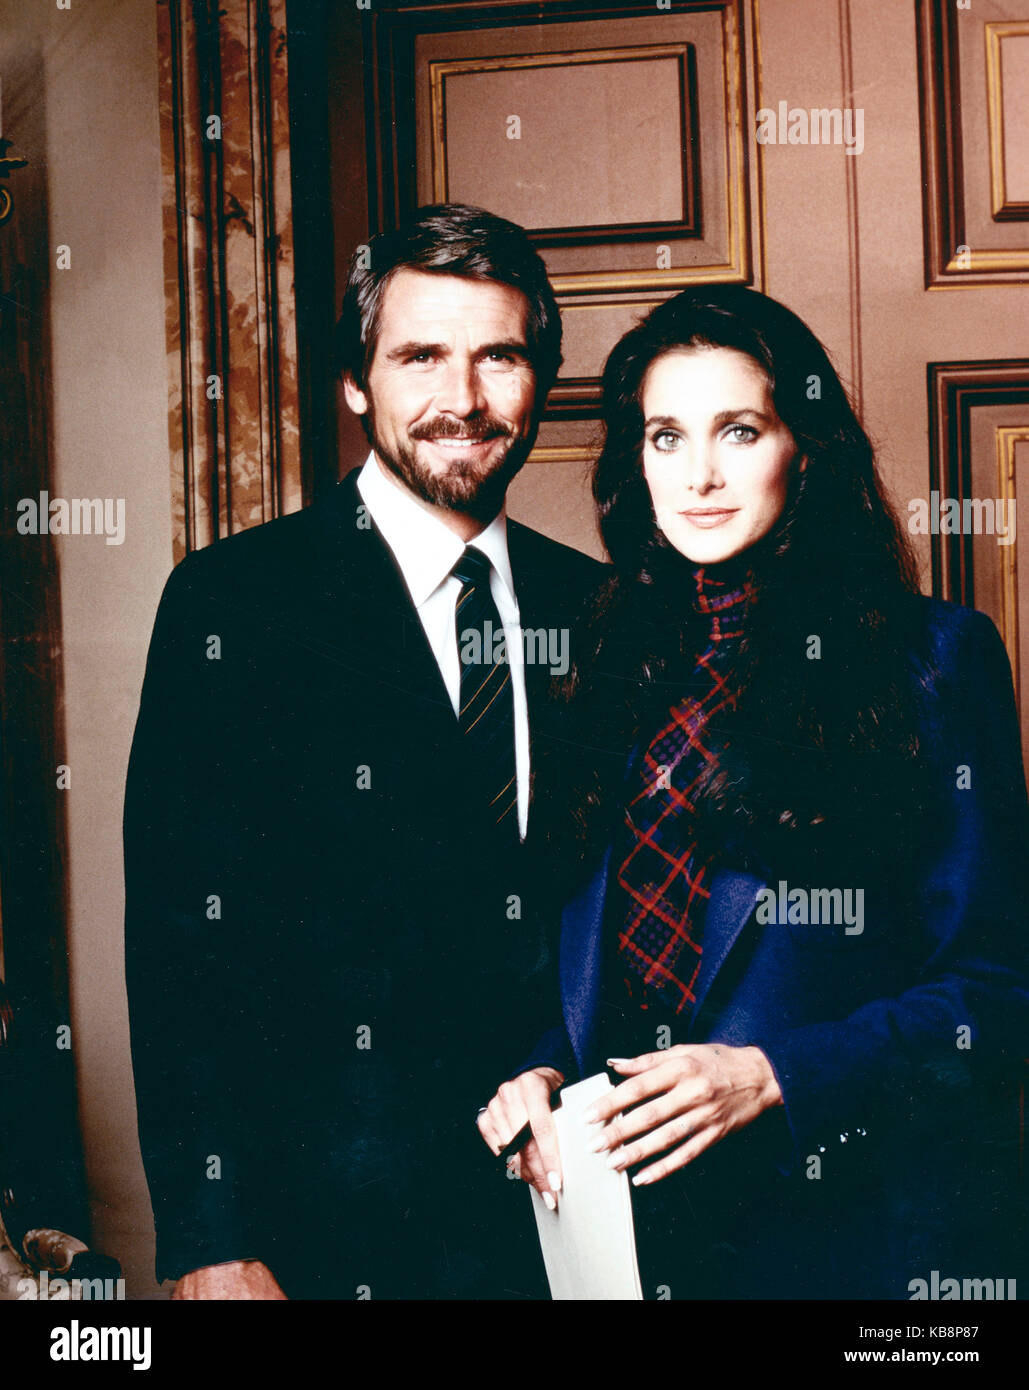 Hotel, USA 1983, Produktion: Aaron Spelling, Darsteller: James Brolin, Connie Sellecca Stock Photo